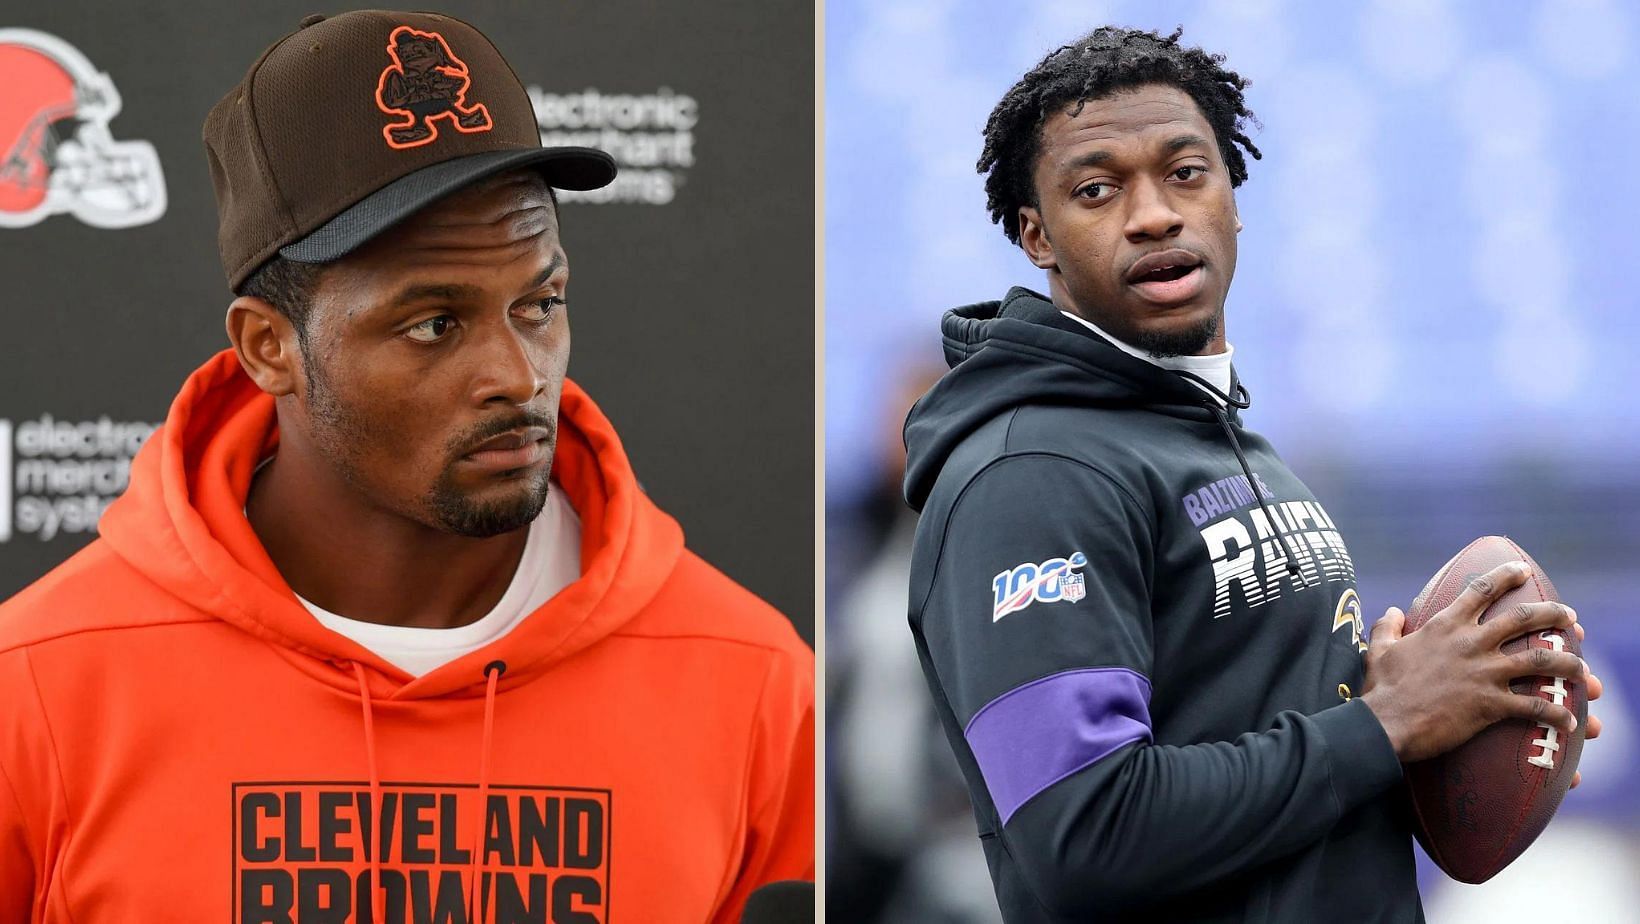 Robert Griffin III comes down hard on Browns for Watson